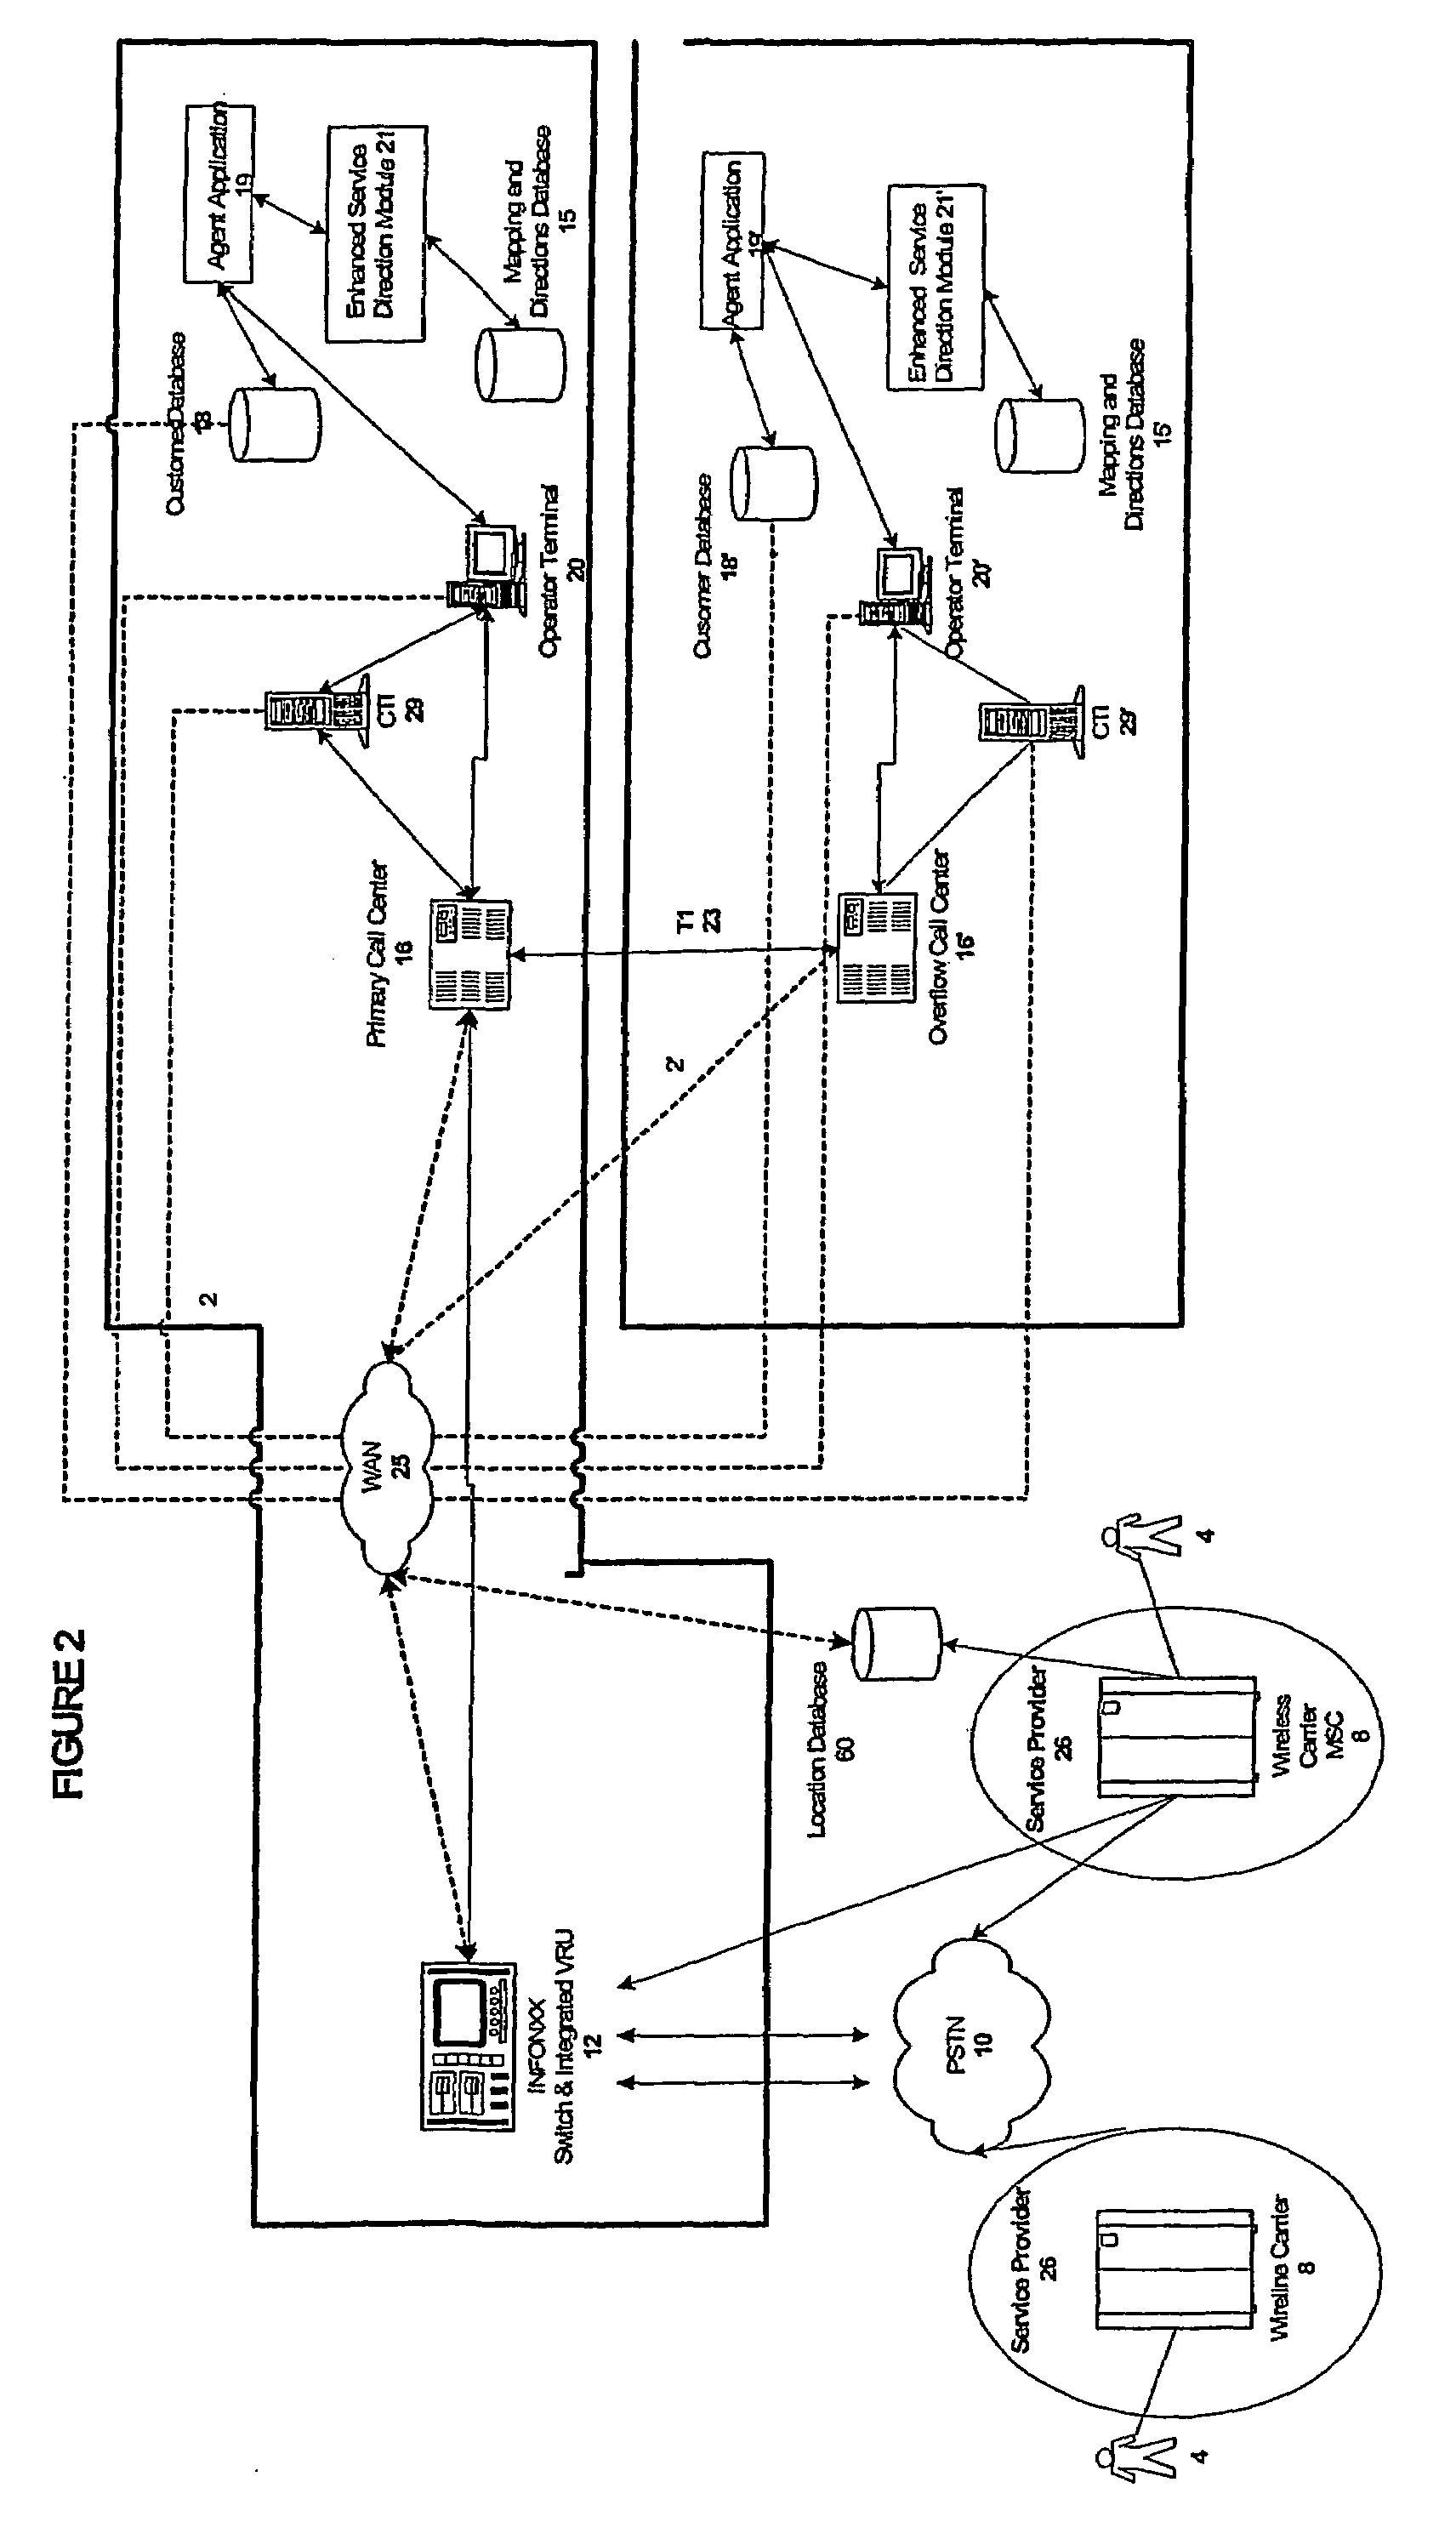 Enhanced directory assistance system